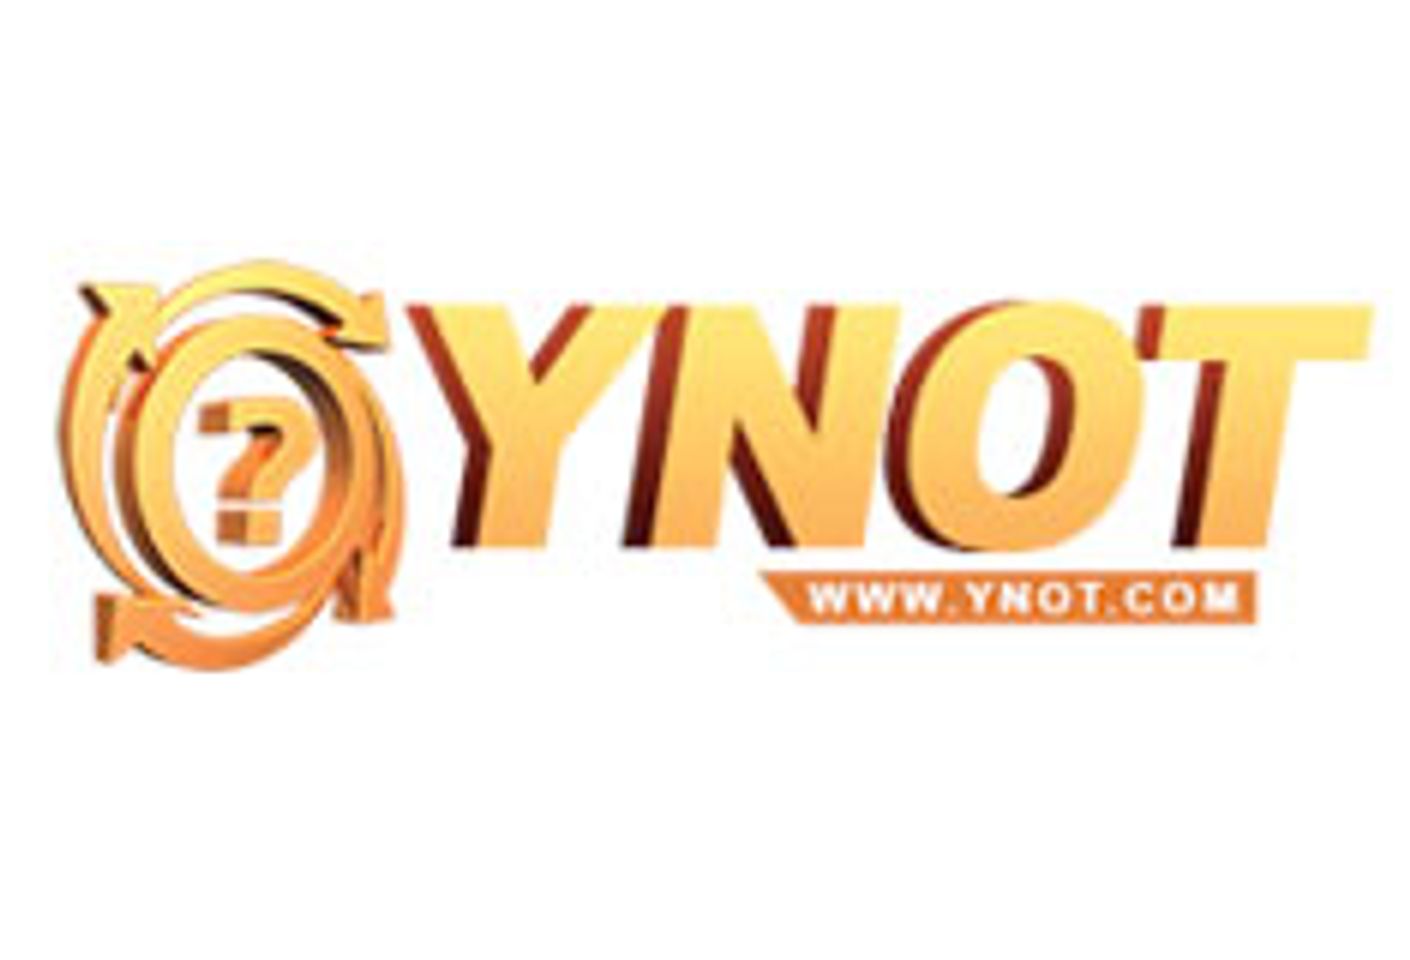 YNOT.com Relaunches With New Look, Better Ways To Interact, More